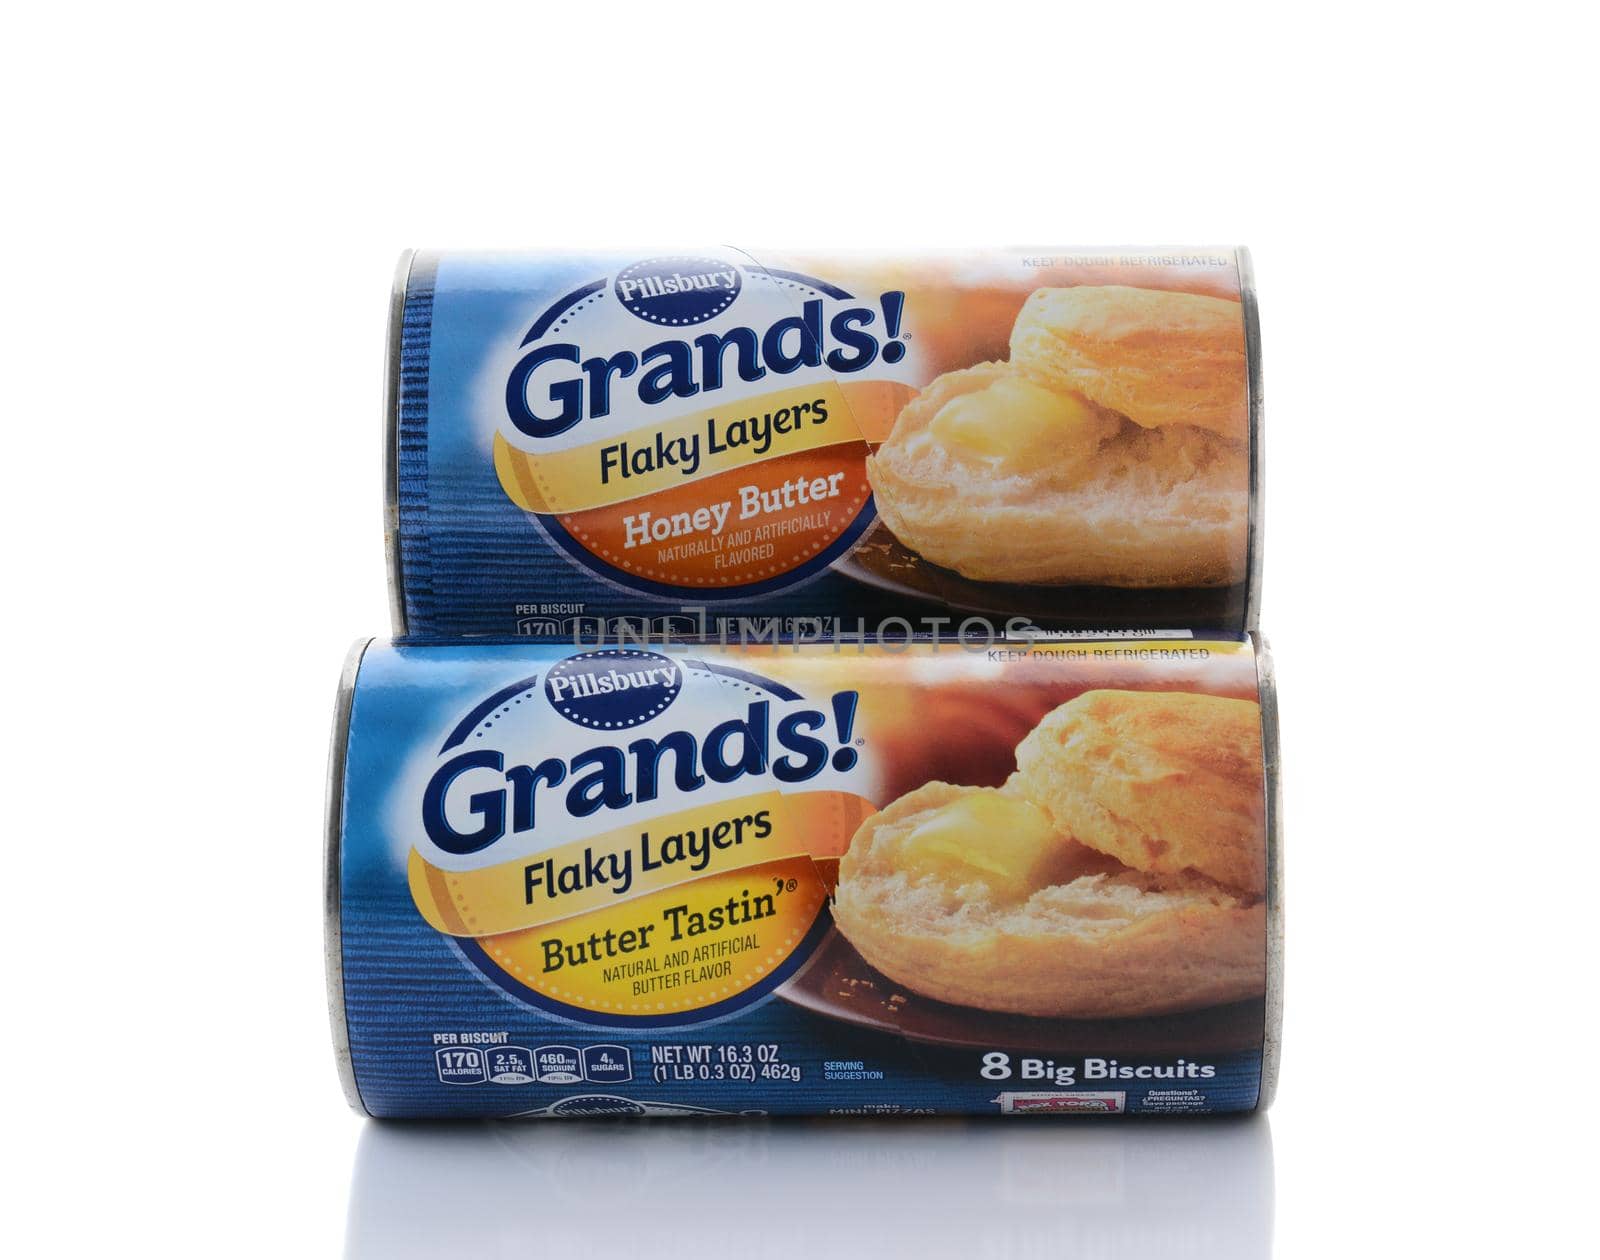 IRVINE, CA - FEBRUARY 15, 2015: Two cans of Pillsbury Grands Biscuits. A line of refrigerated ready to bake doughs from General Mills.